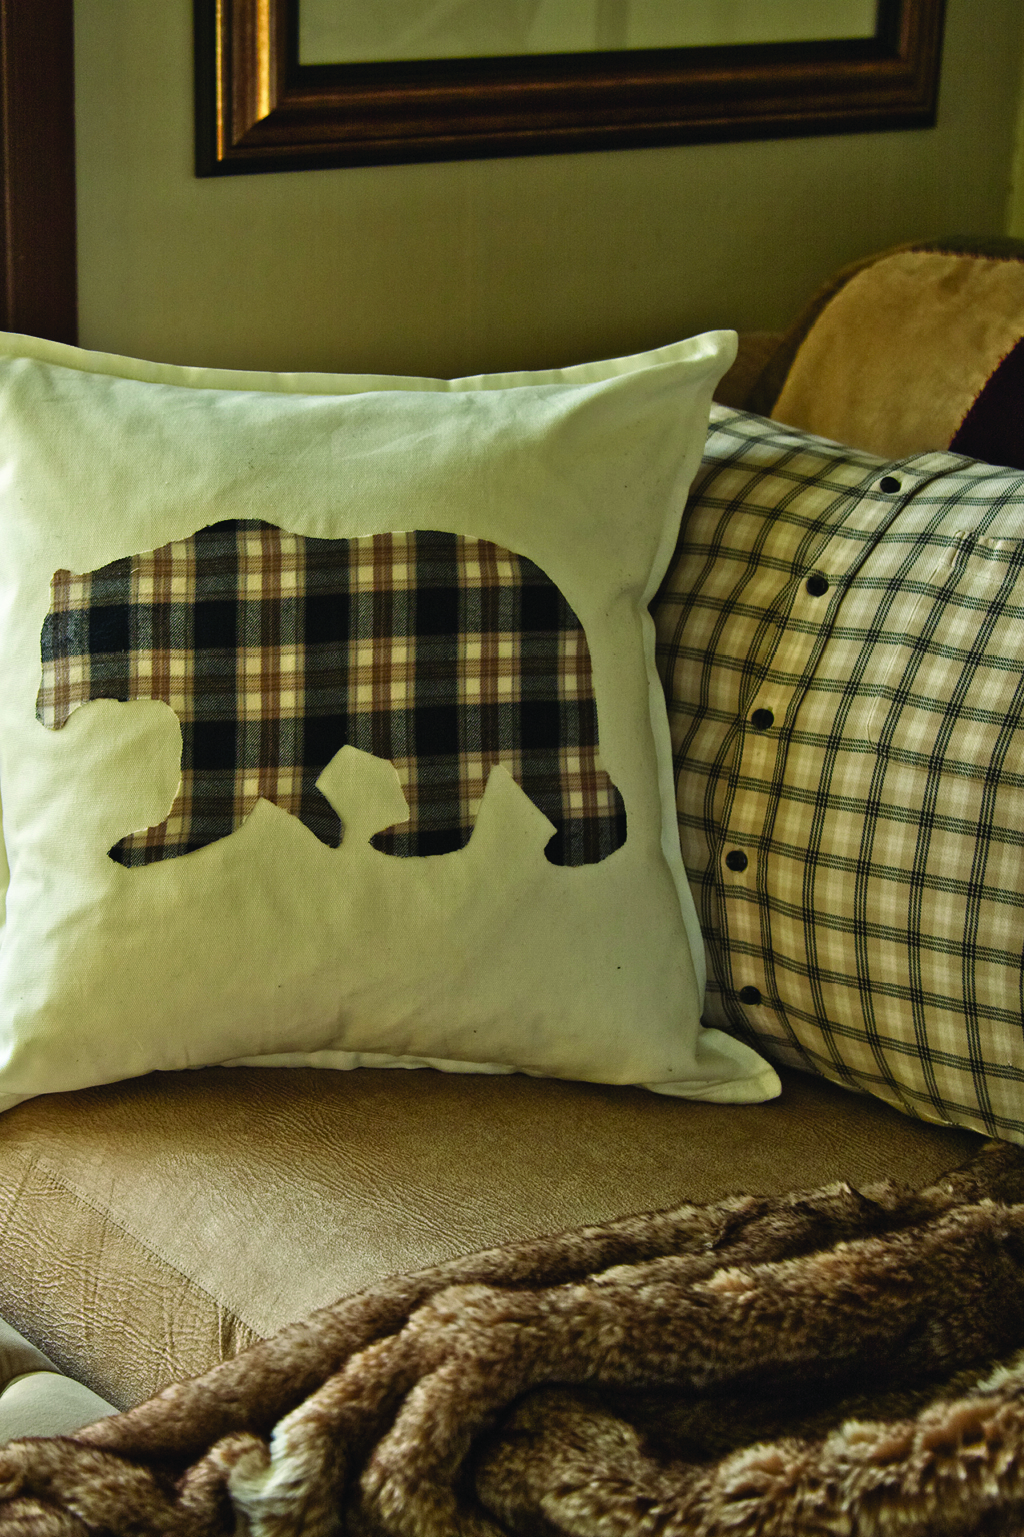 White and blue flannel pillows on a brown couch